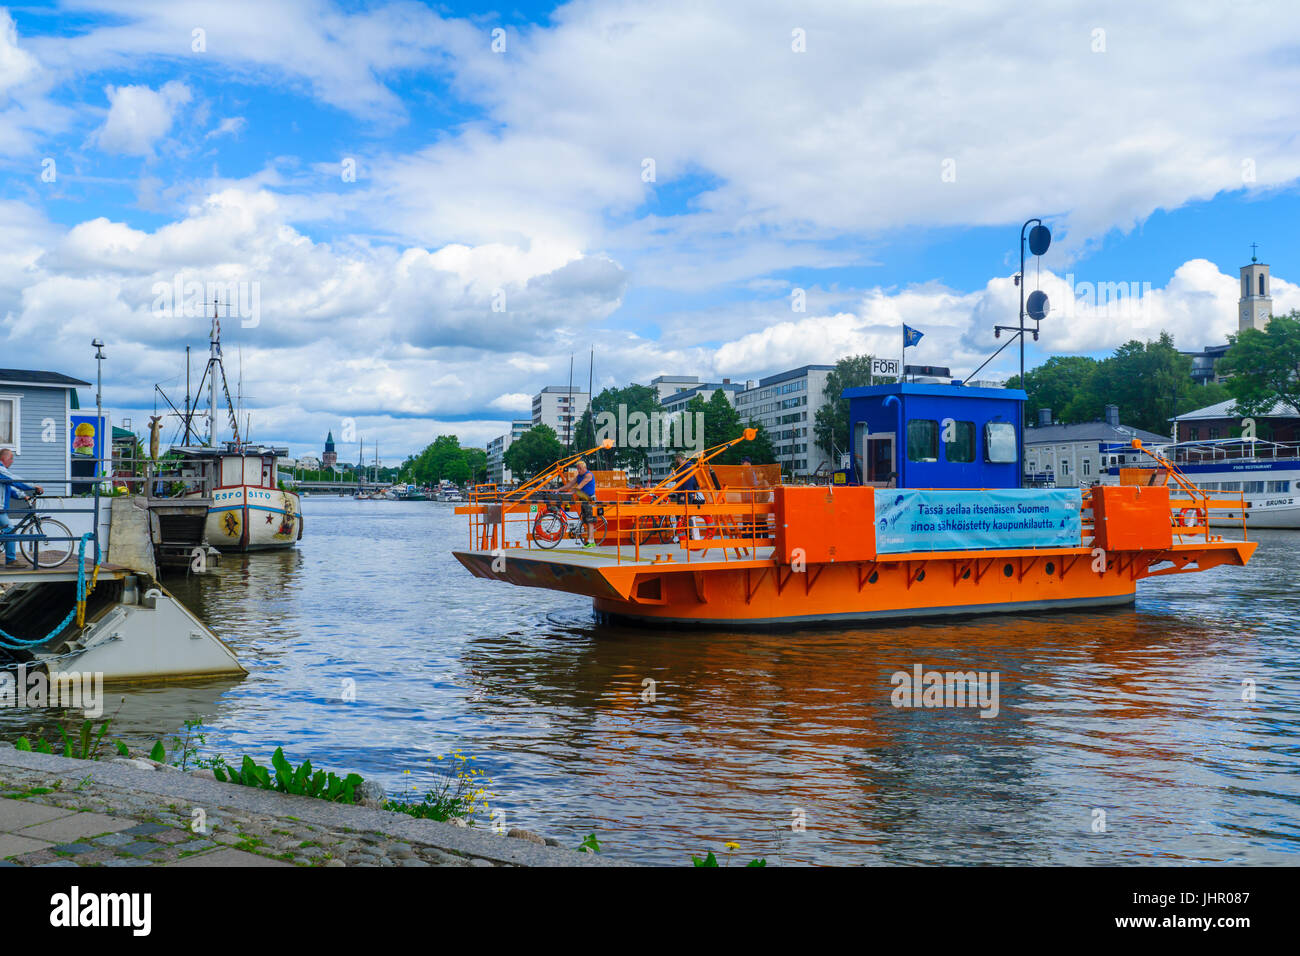 TURKU, FINLAND - JUNE 23, 2017: Scene of the Aura river, with the Fori ferry and passengers, in Turku, Finland Stock Photo